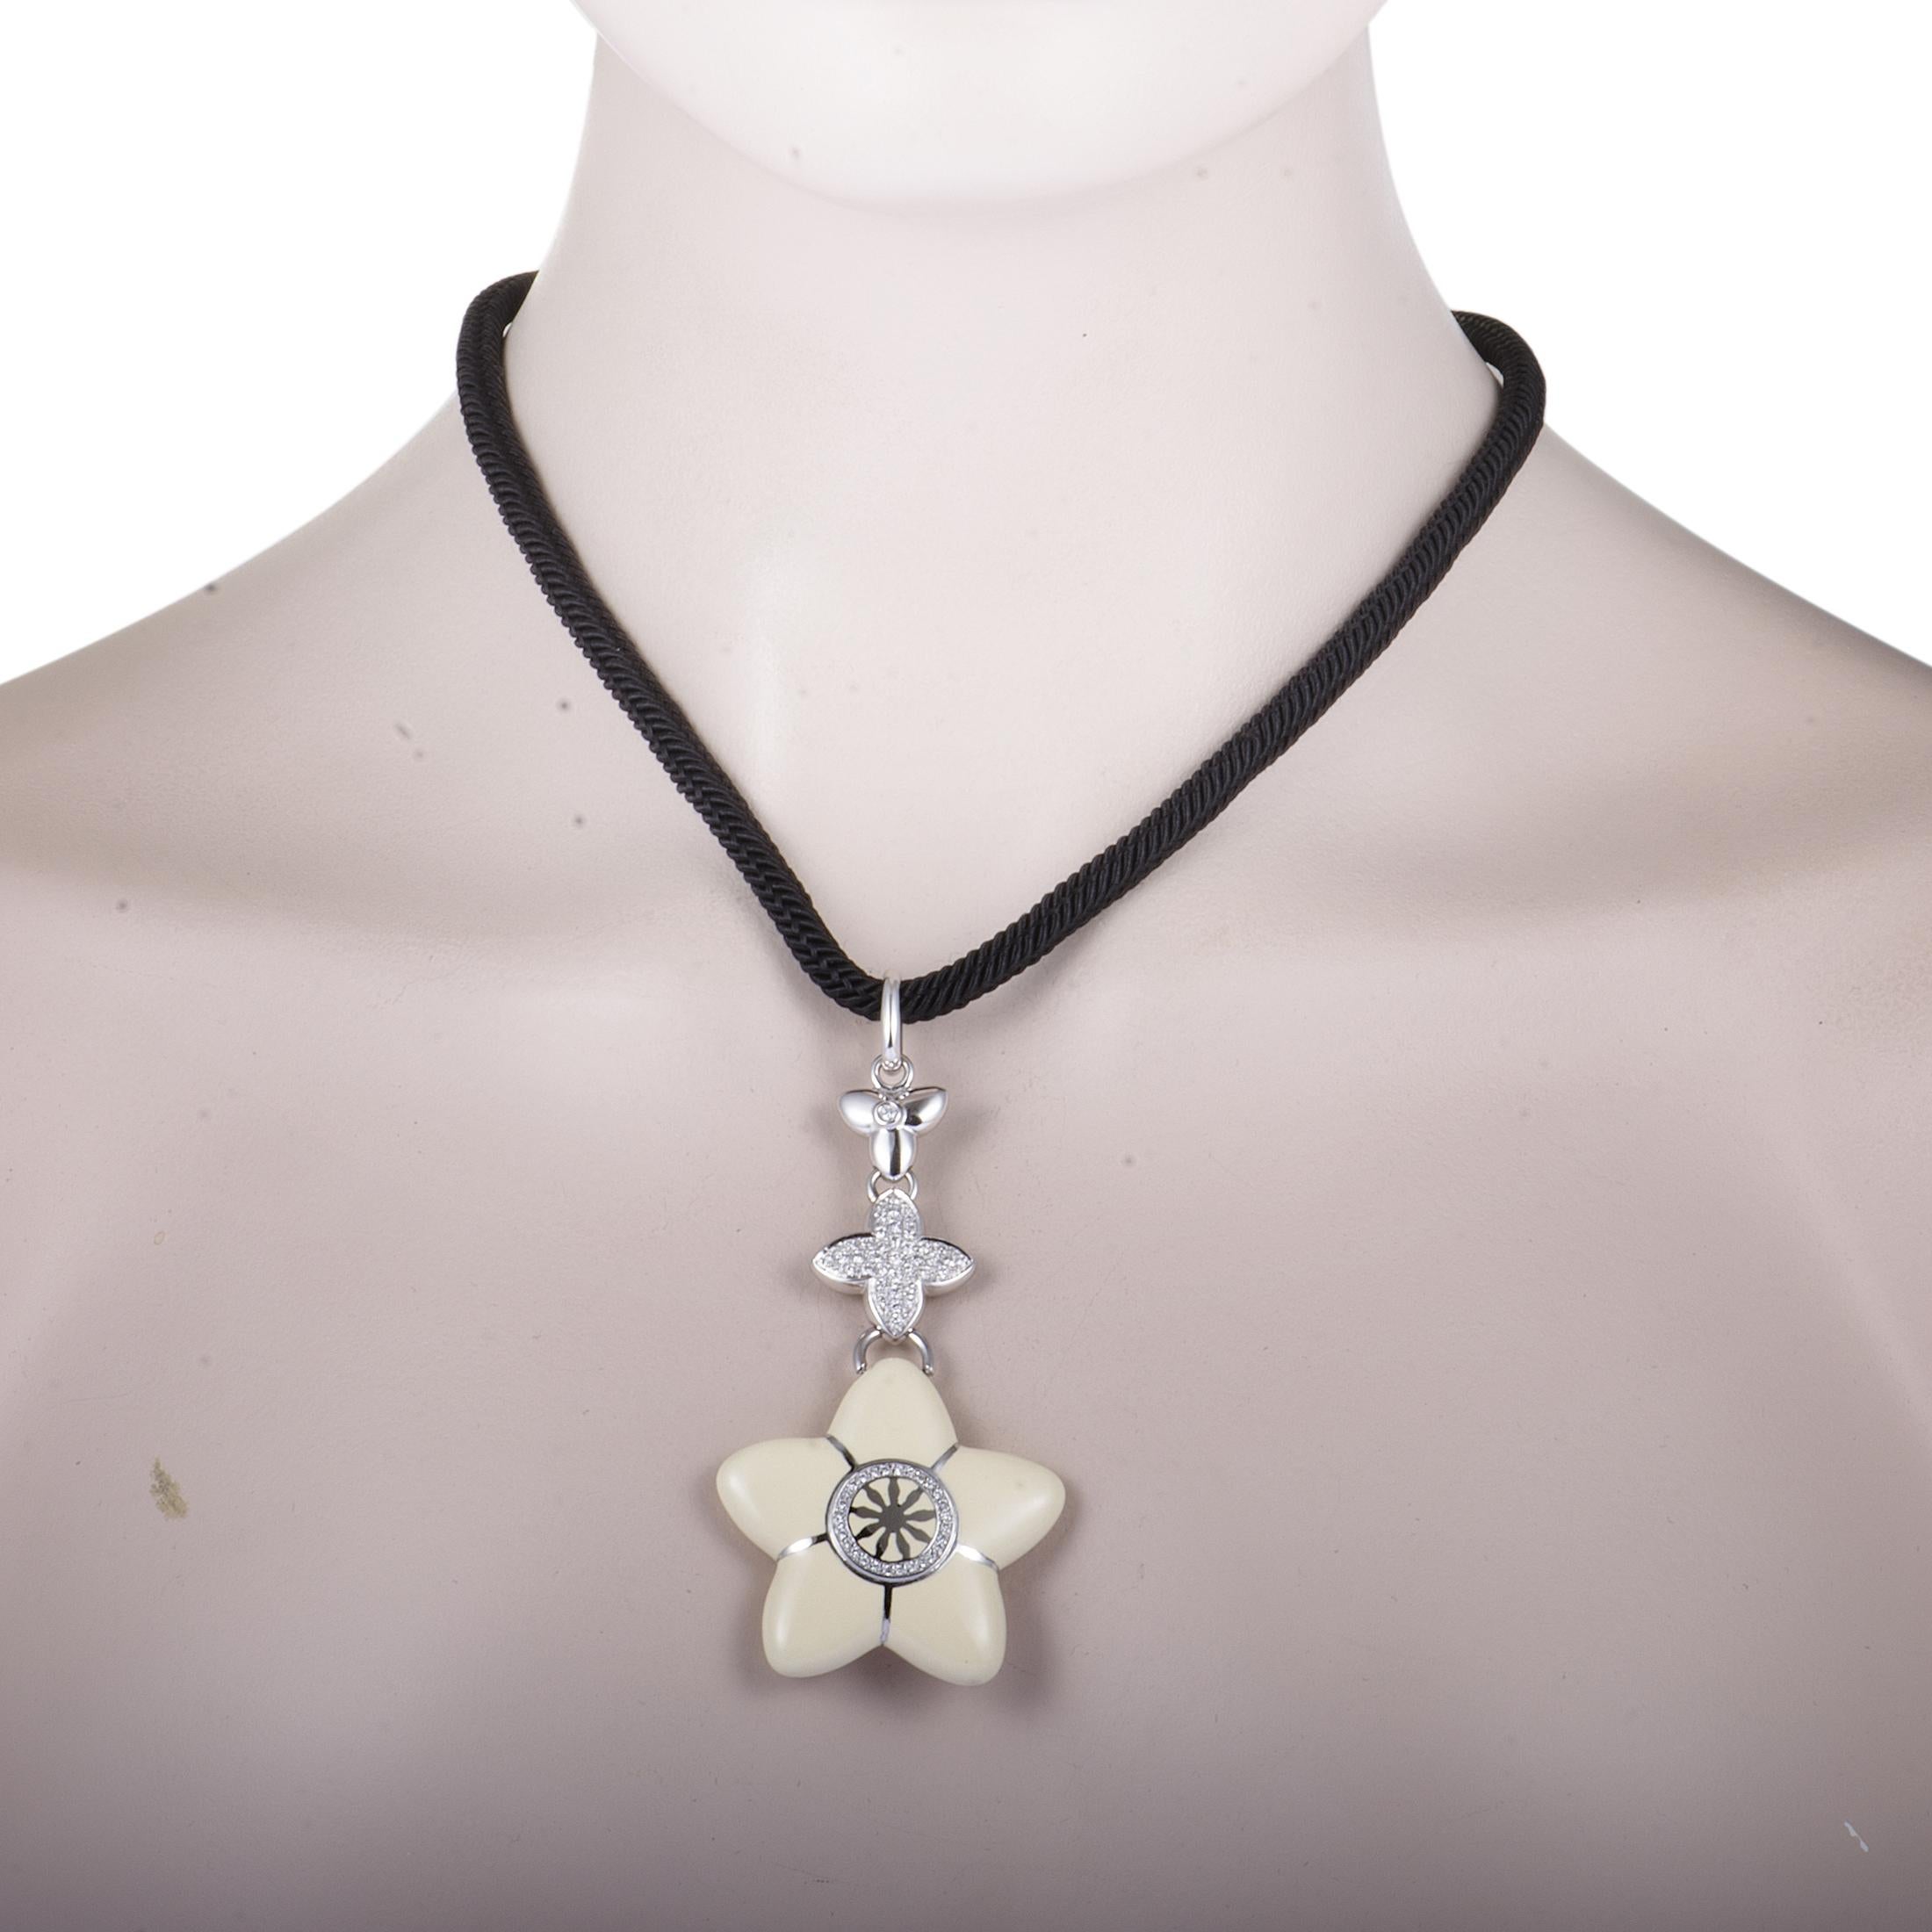 Accentuate your look in an exceptionally gorgeous manner with this spectacular floral necklace by Nouvelle Bague that is attractively made from a luxurious combination of 18K white gold and sterling silver and beautifully decorated with 0.86ct of